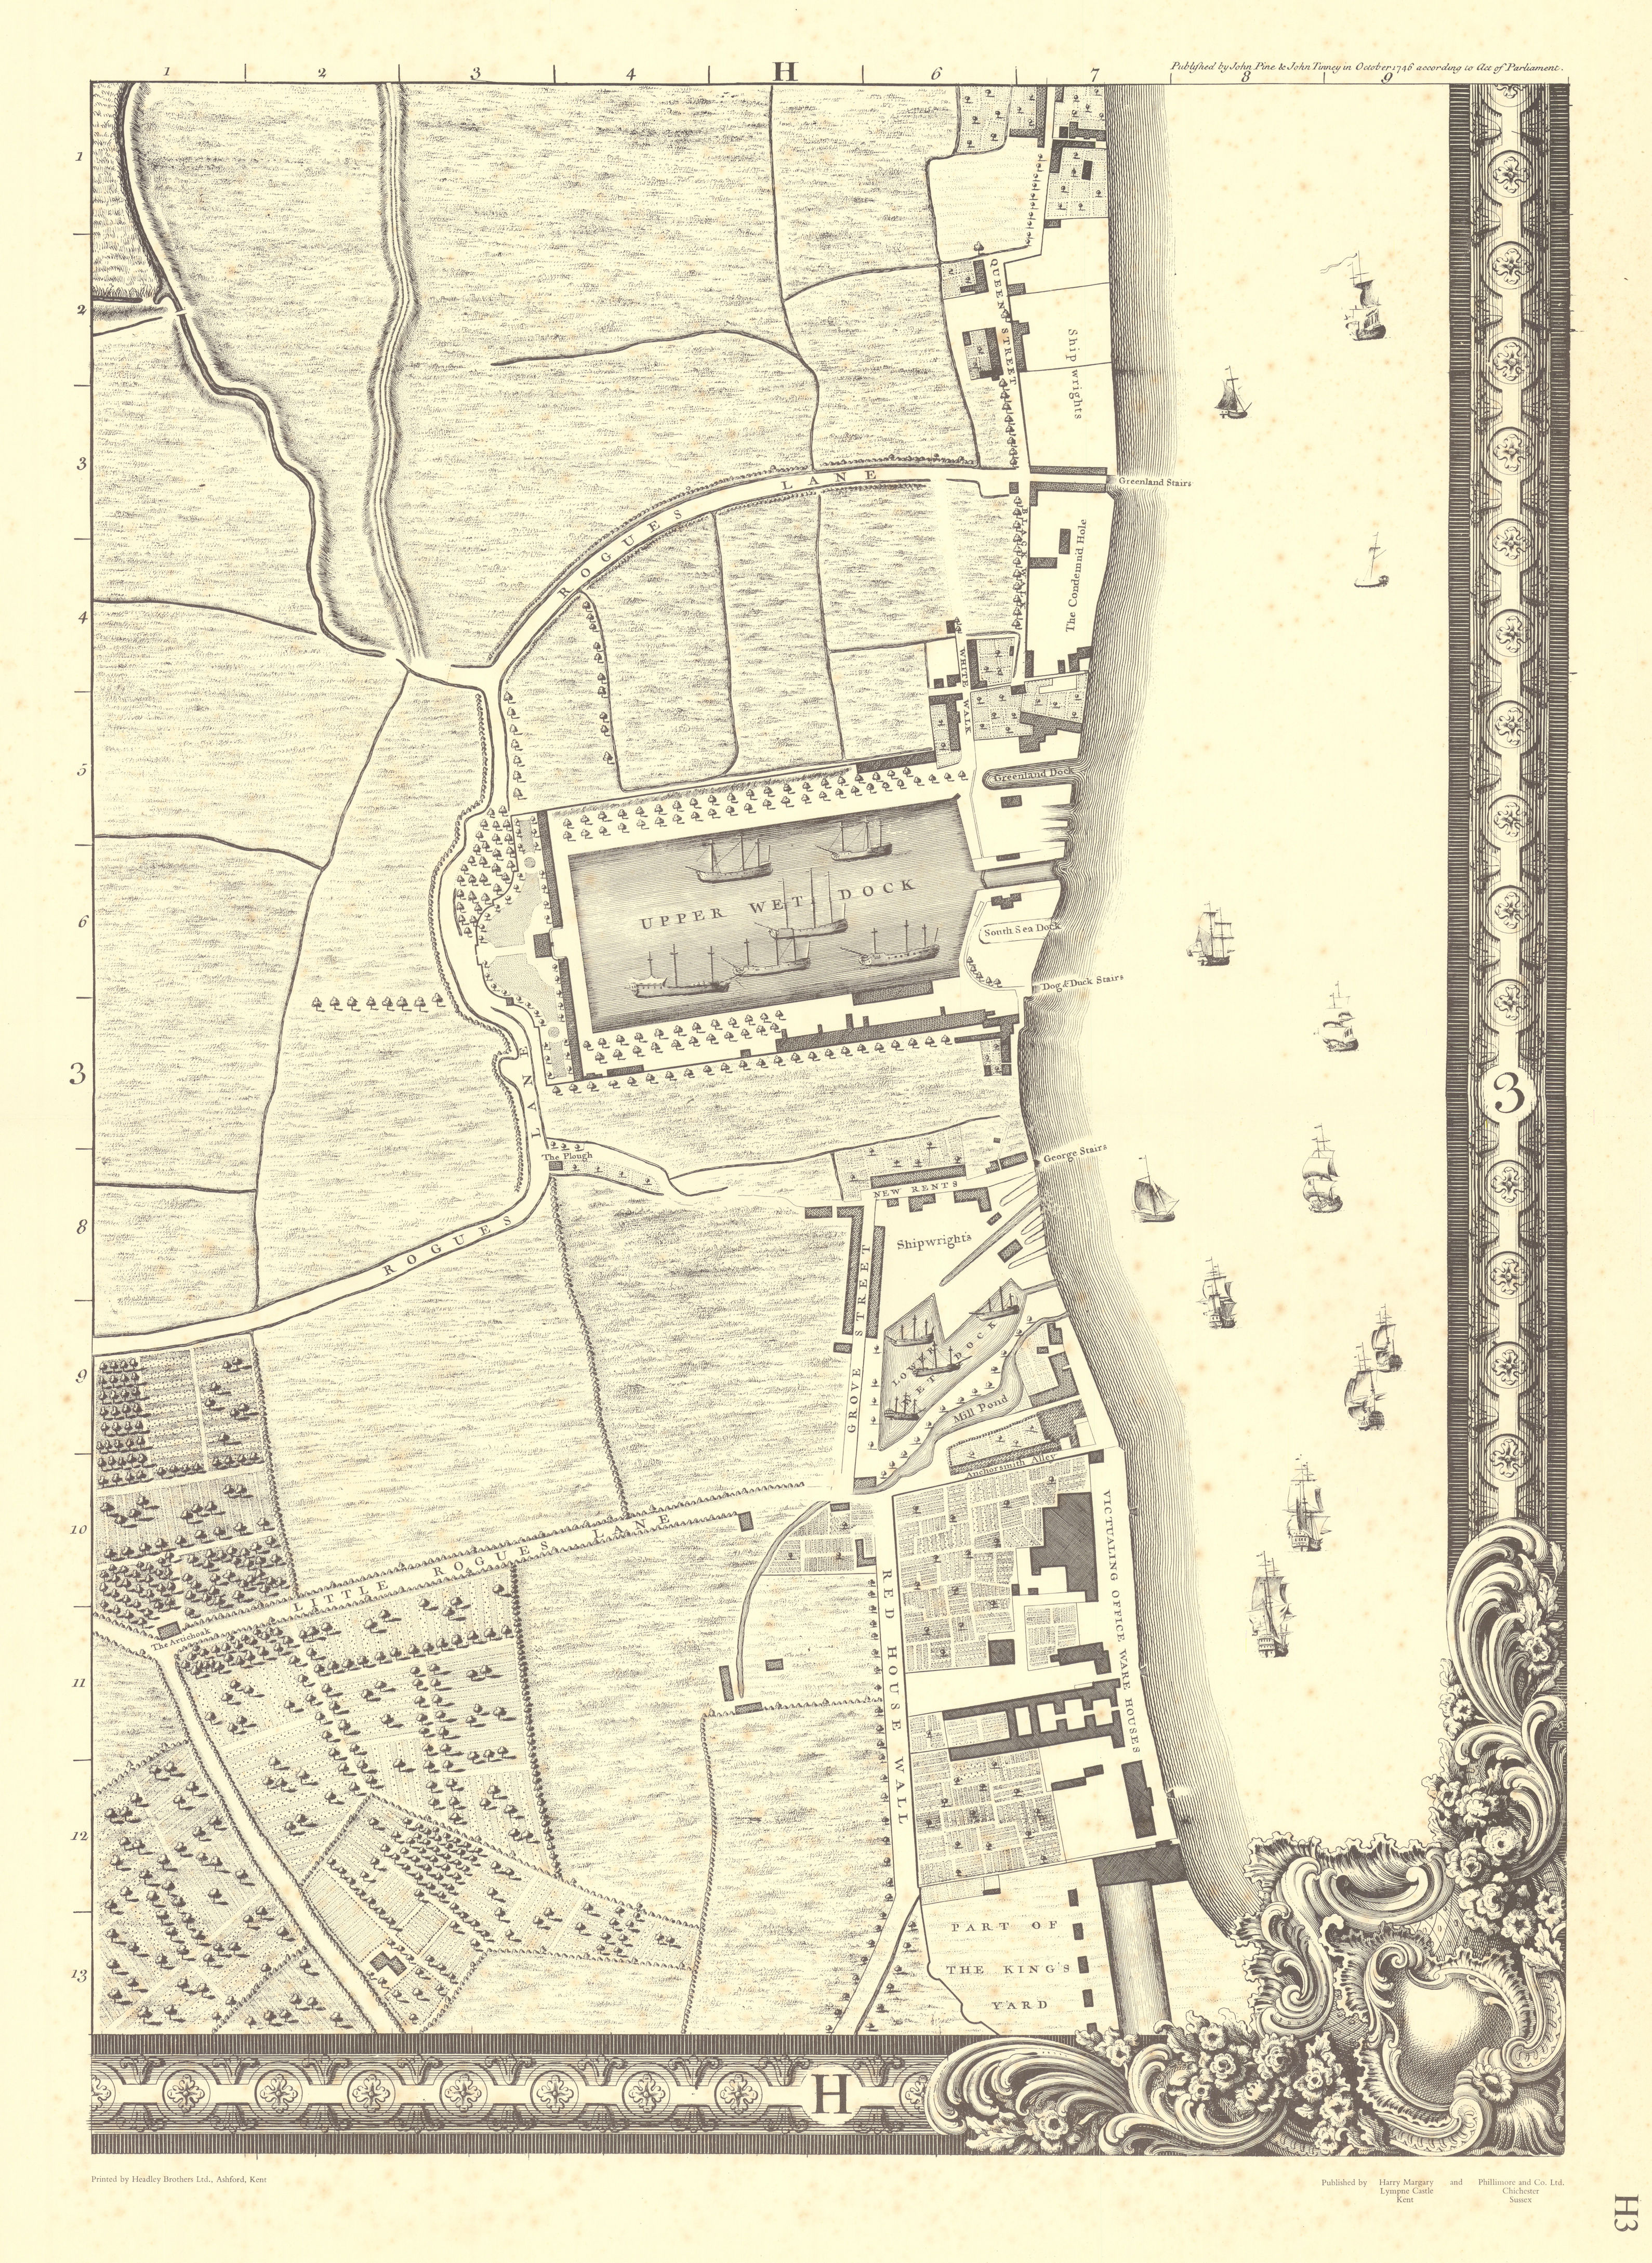 Rotherhithe Surrey Quays Deptford Greenland Dock H3 after ROCQUE 1971 (1746) map